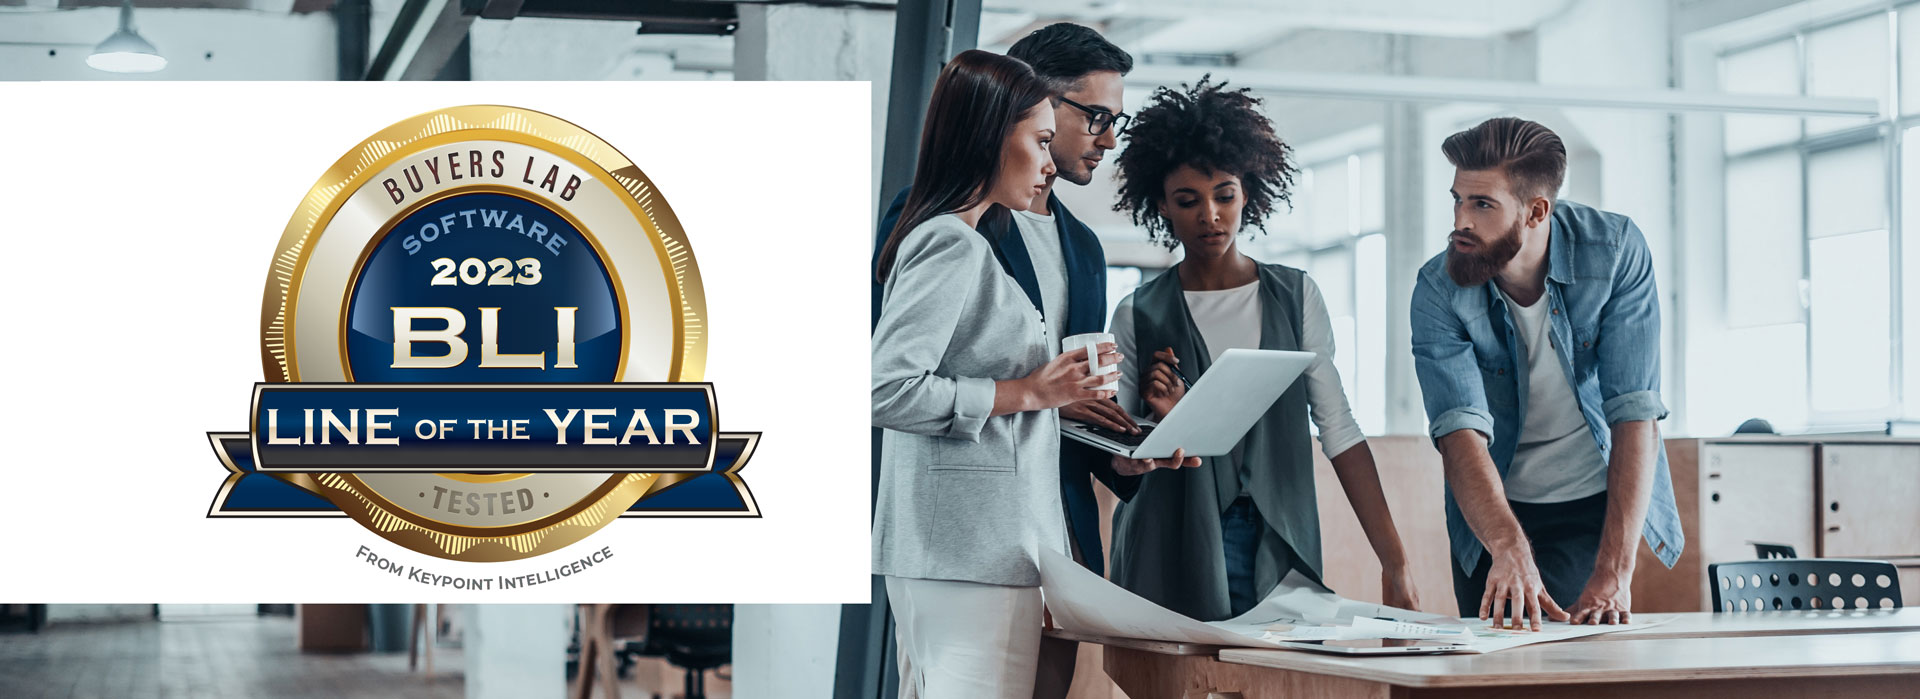 BLI 2023 Workplace Software Line of the Year